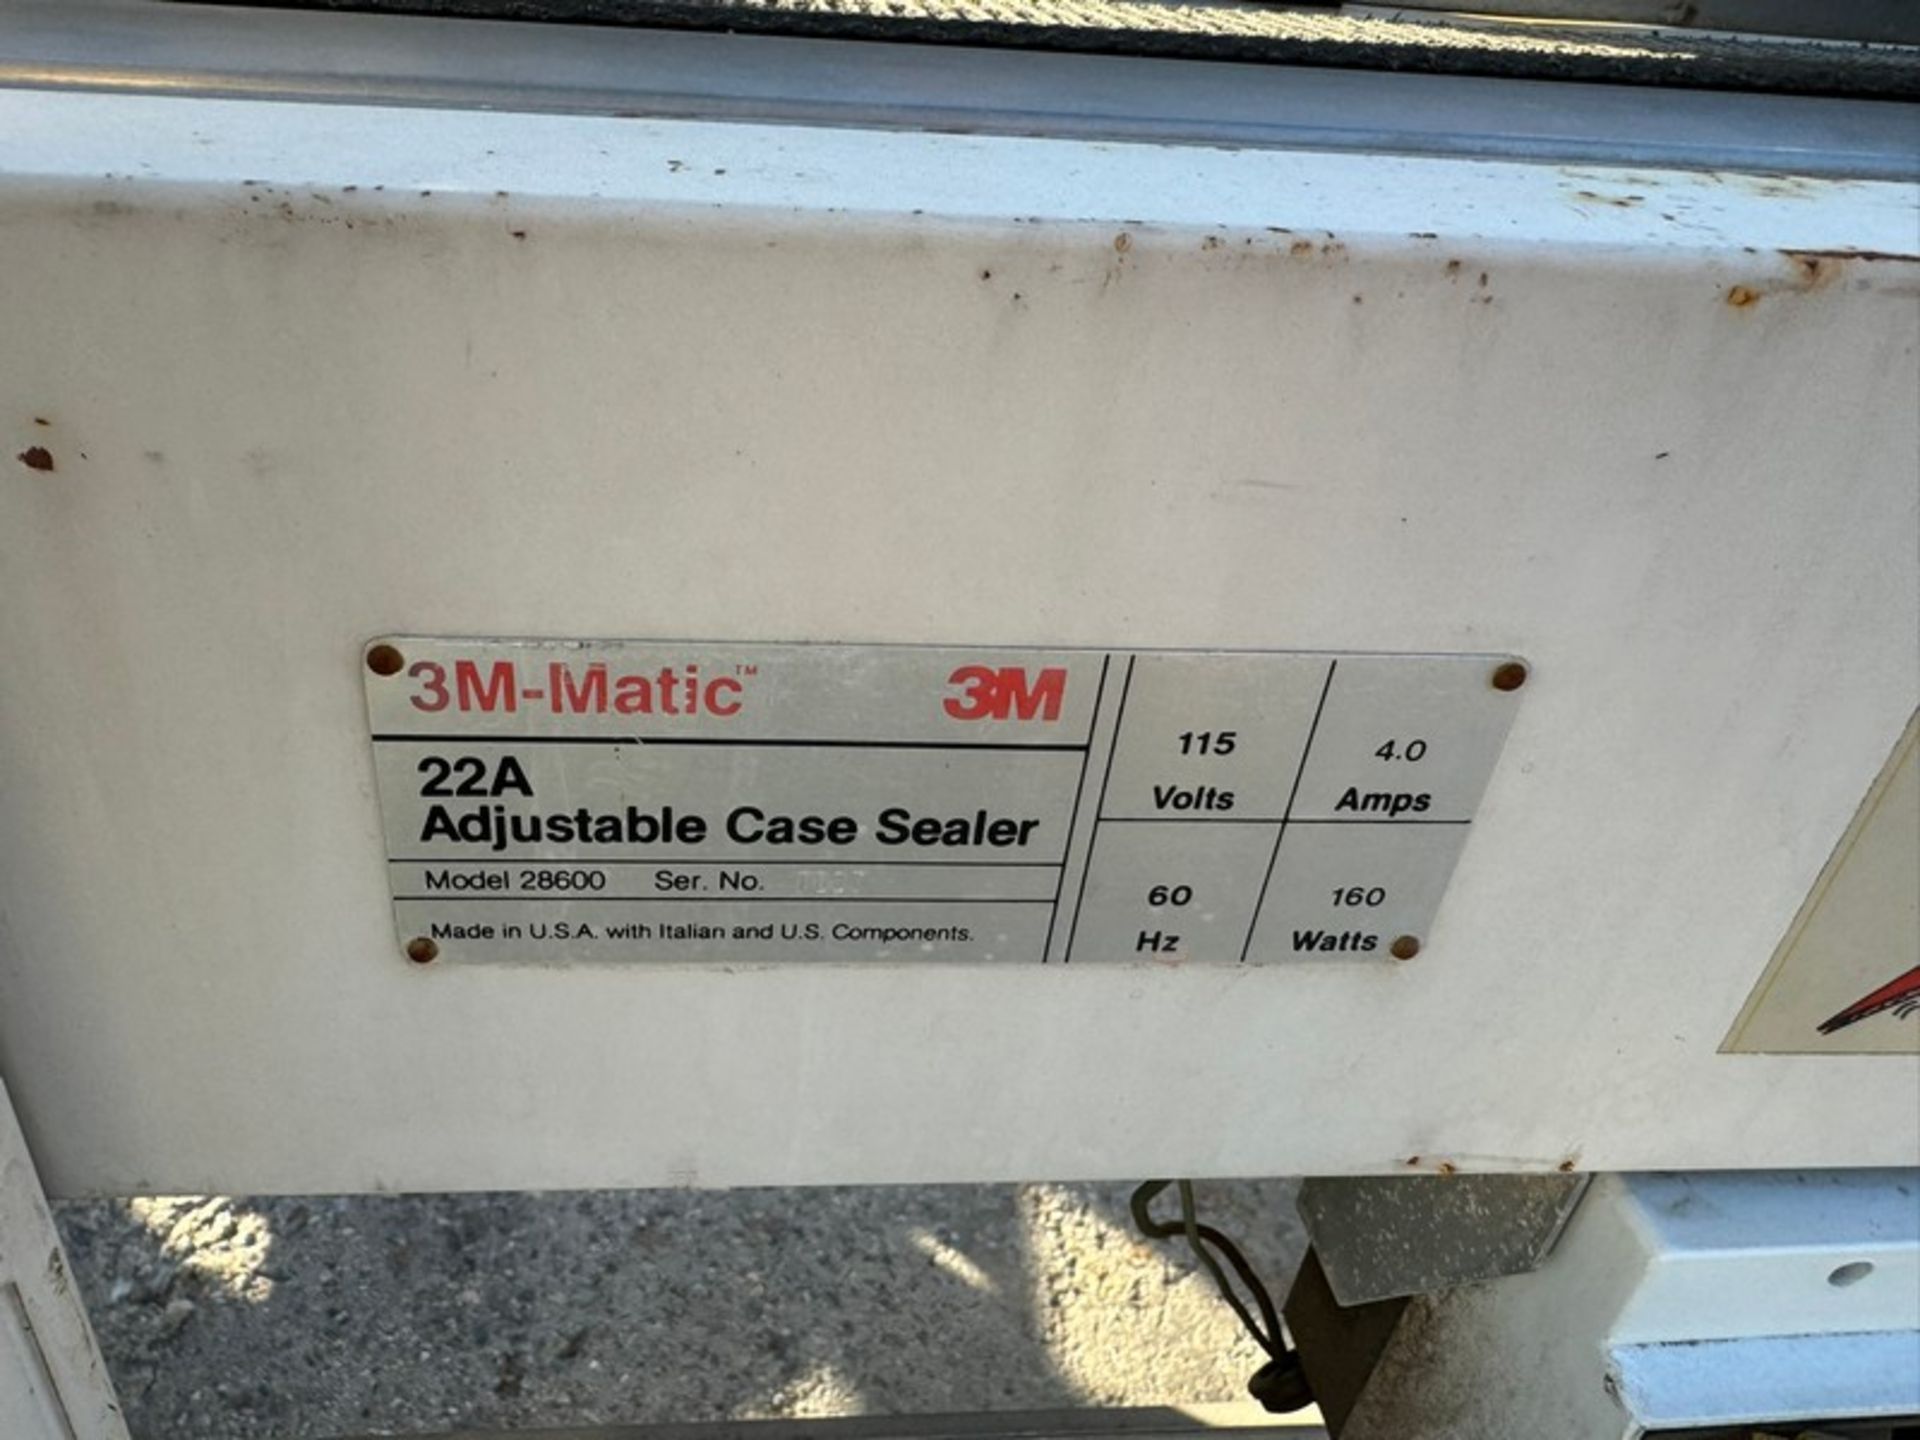 3M-Matic Adjustable Case Sealer, M/N 28600, 115 Volts (LOCATED IN COLTON, CA) - Image 3 of 4